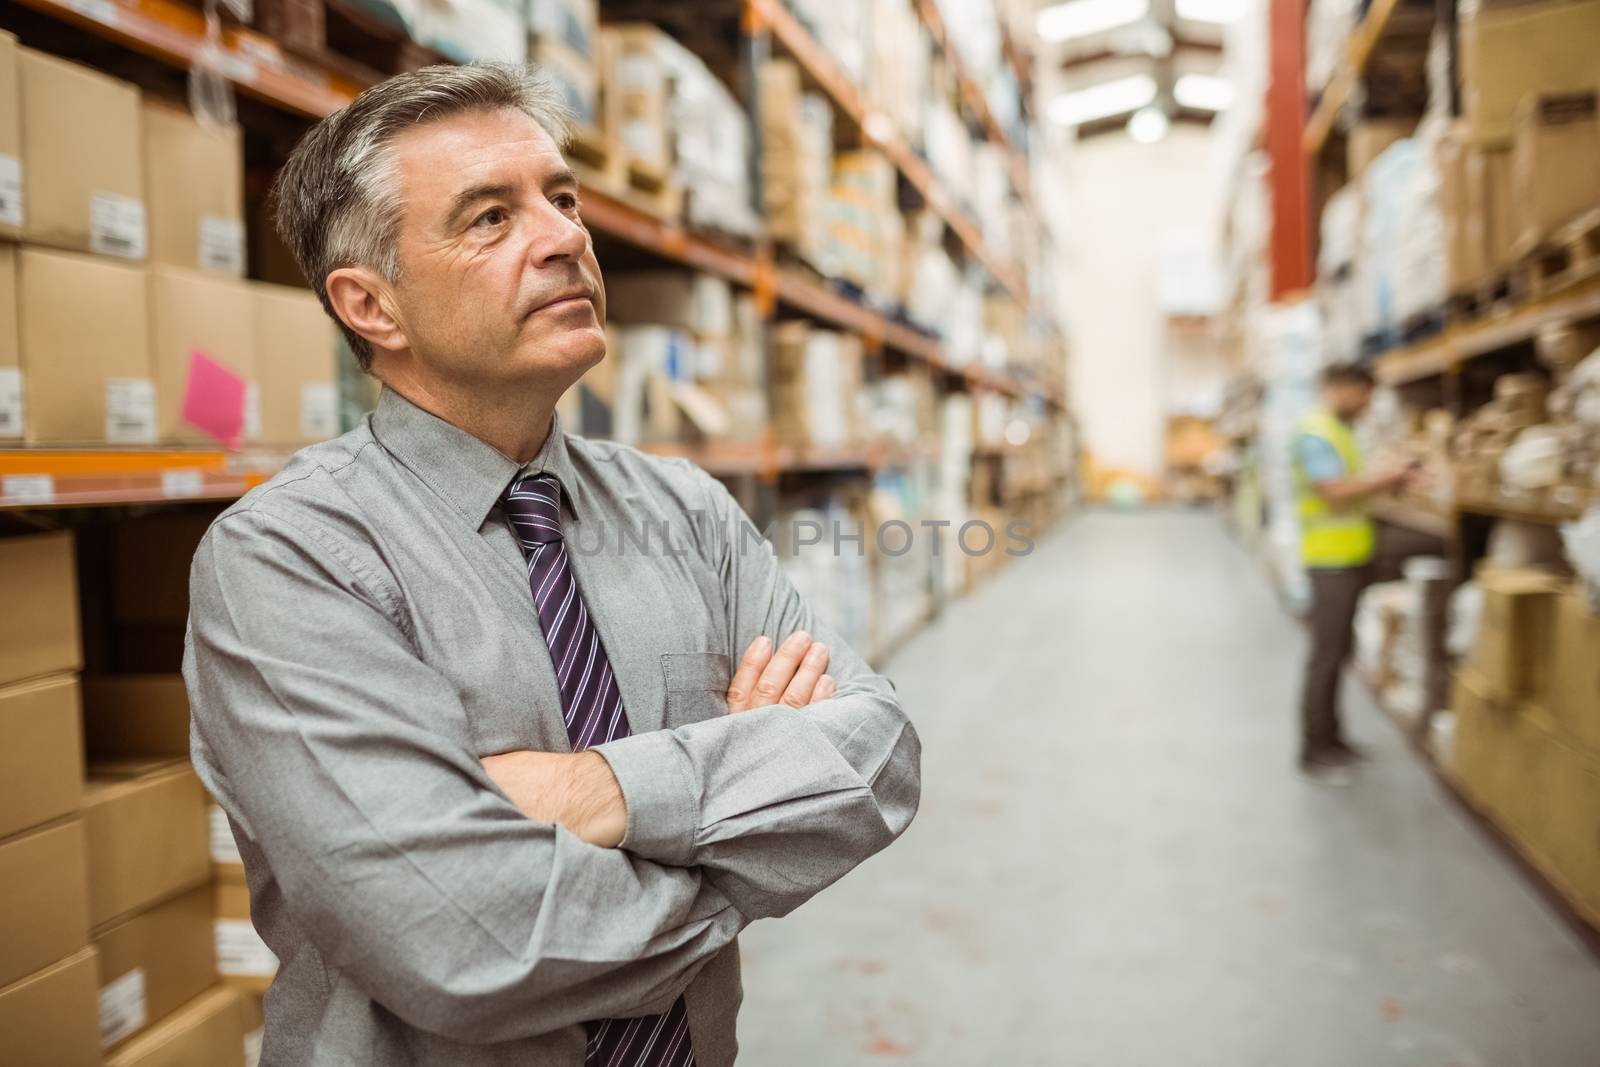 Thoughtful businessman with crossed arms in a large warehouse